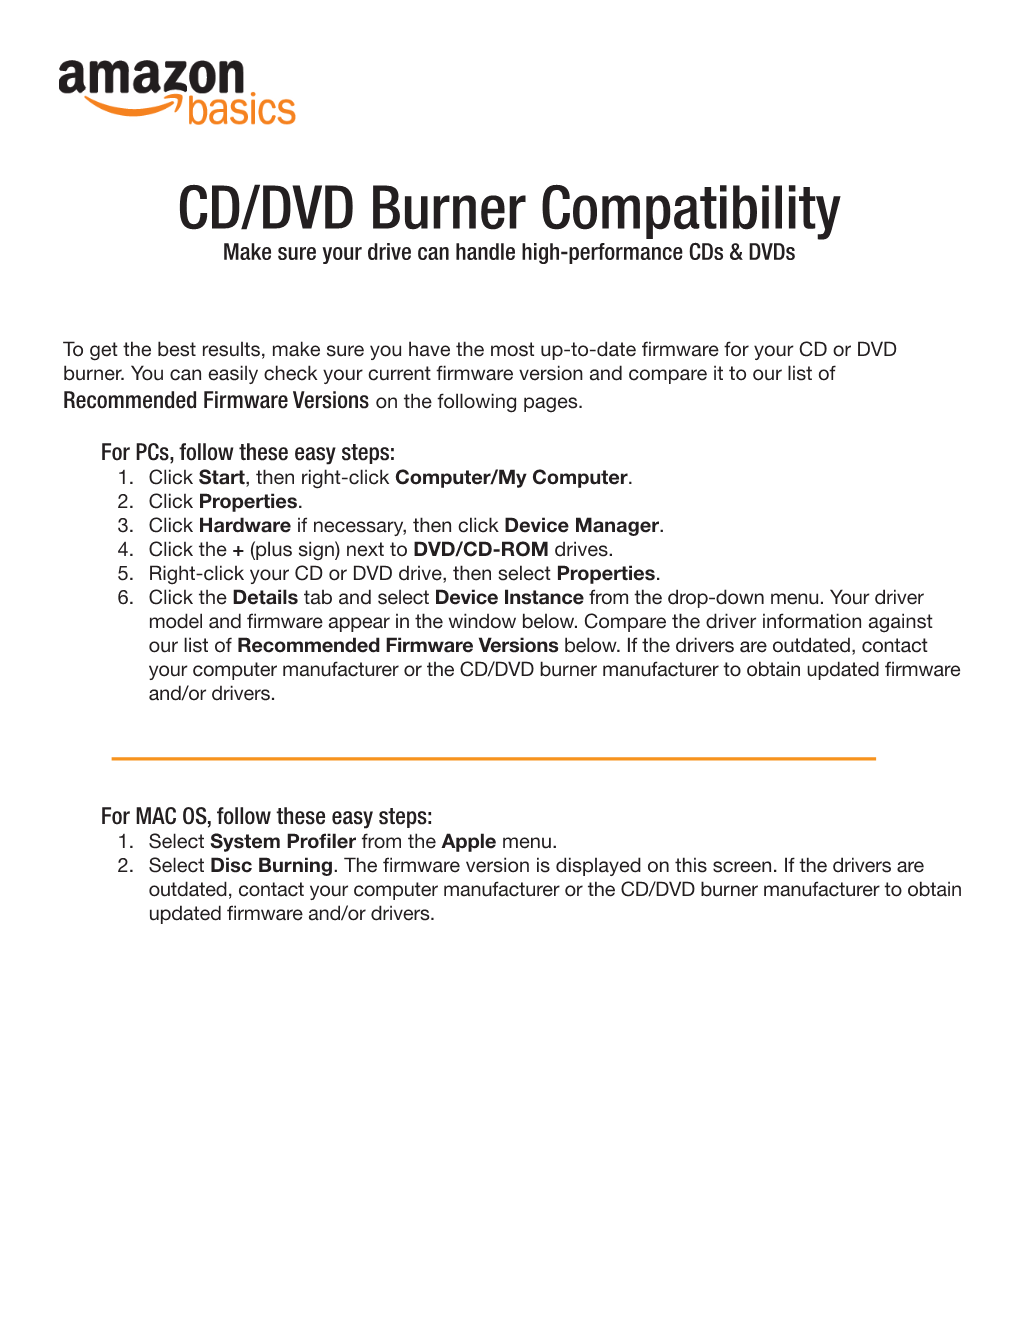 CD/DVD Burner Compatibility Make Sure Your Drive Can Handle High-Performance Cds & Dvds